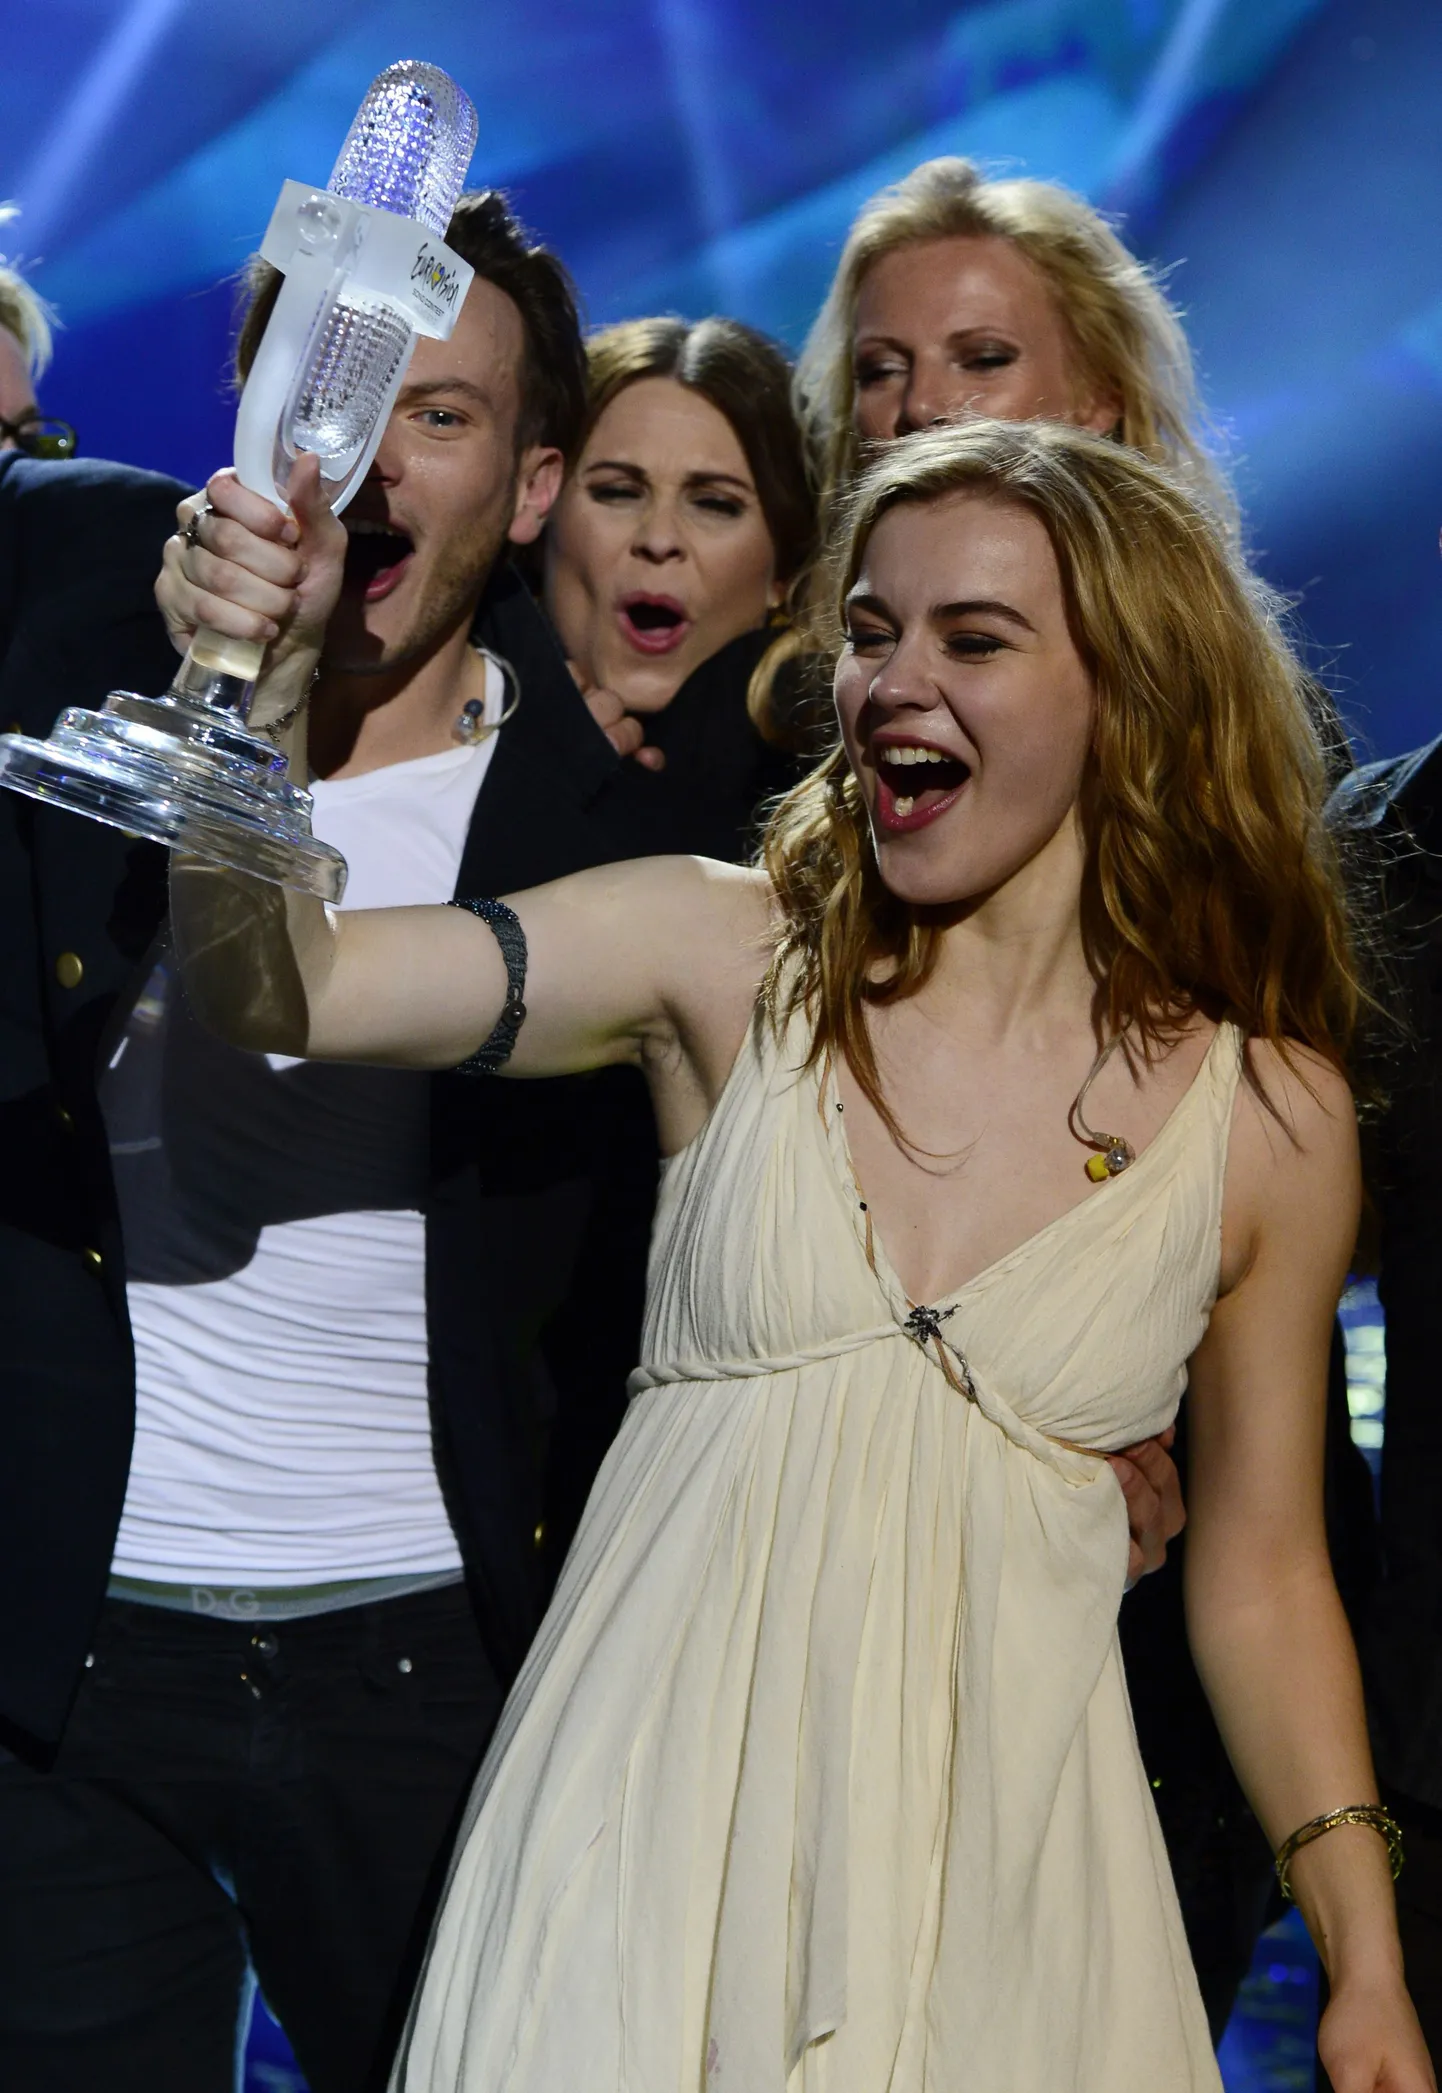 Denmark's Emmelie de Forest raises her prize after winning the final of the 2013 Eurovision Song Contest in Malmoe, Sweden, on May 19, 2013. Denmark won this year's Eurovision Song Contest with the song "Only Teardrops" by Emmelie de Forest. AFP PHOTO / JOHN MACDOUGALL